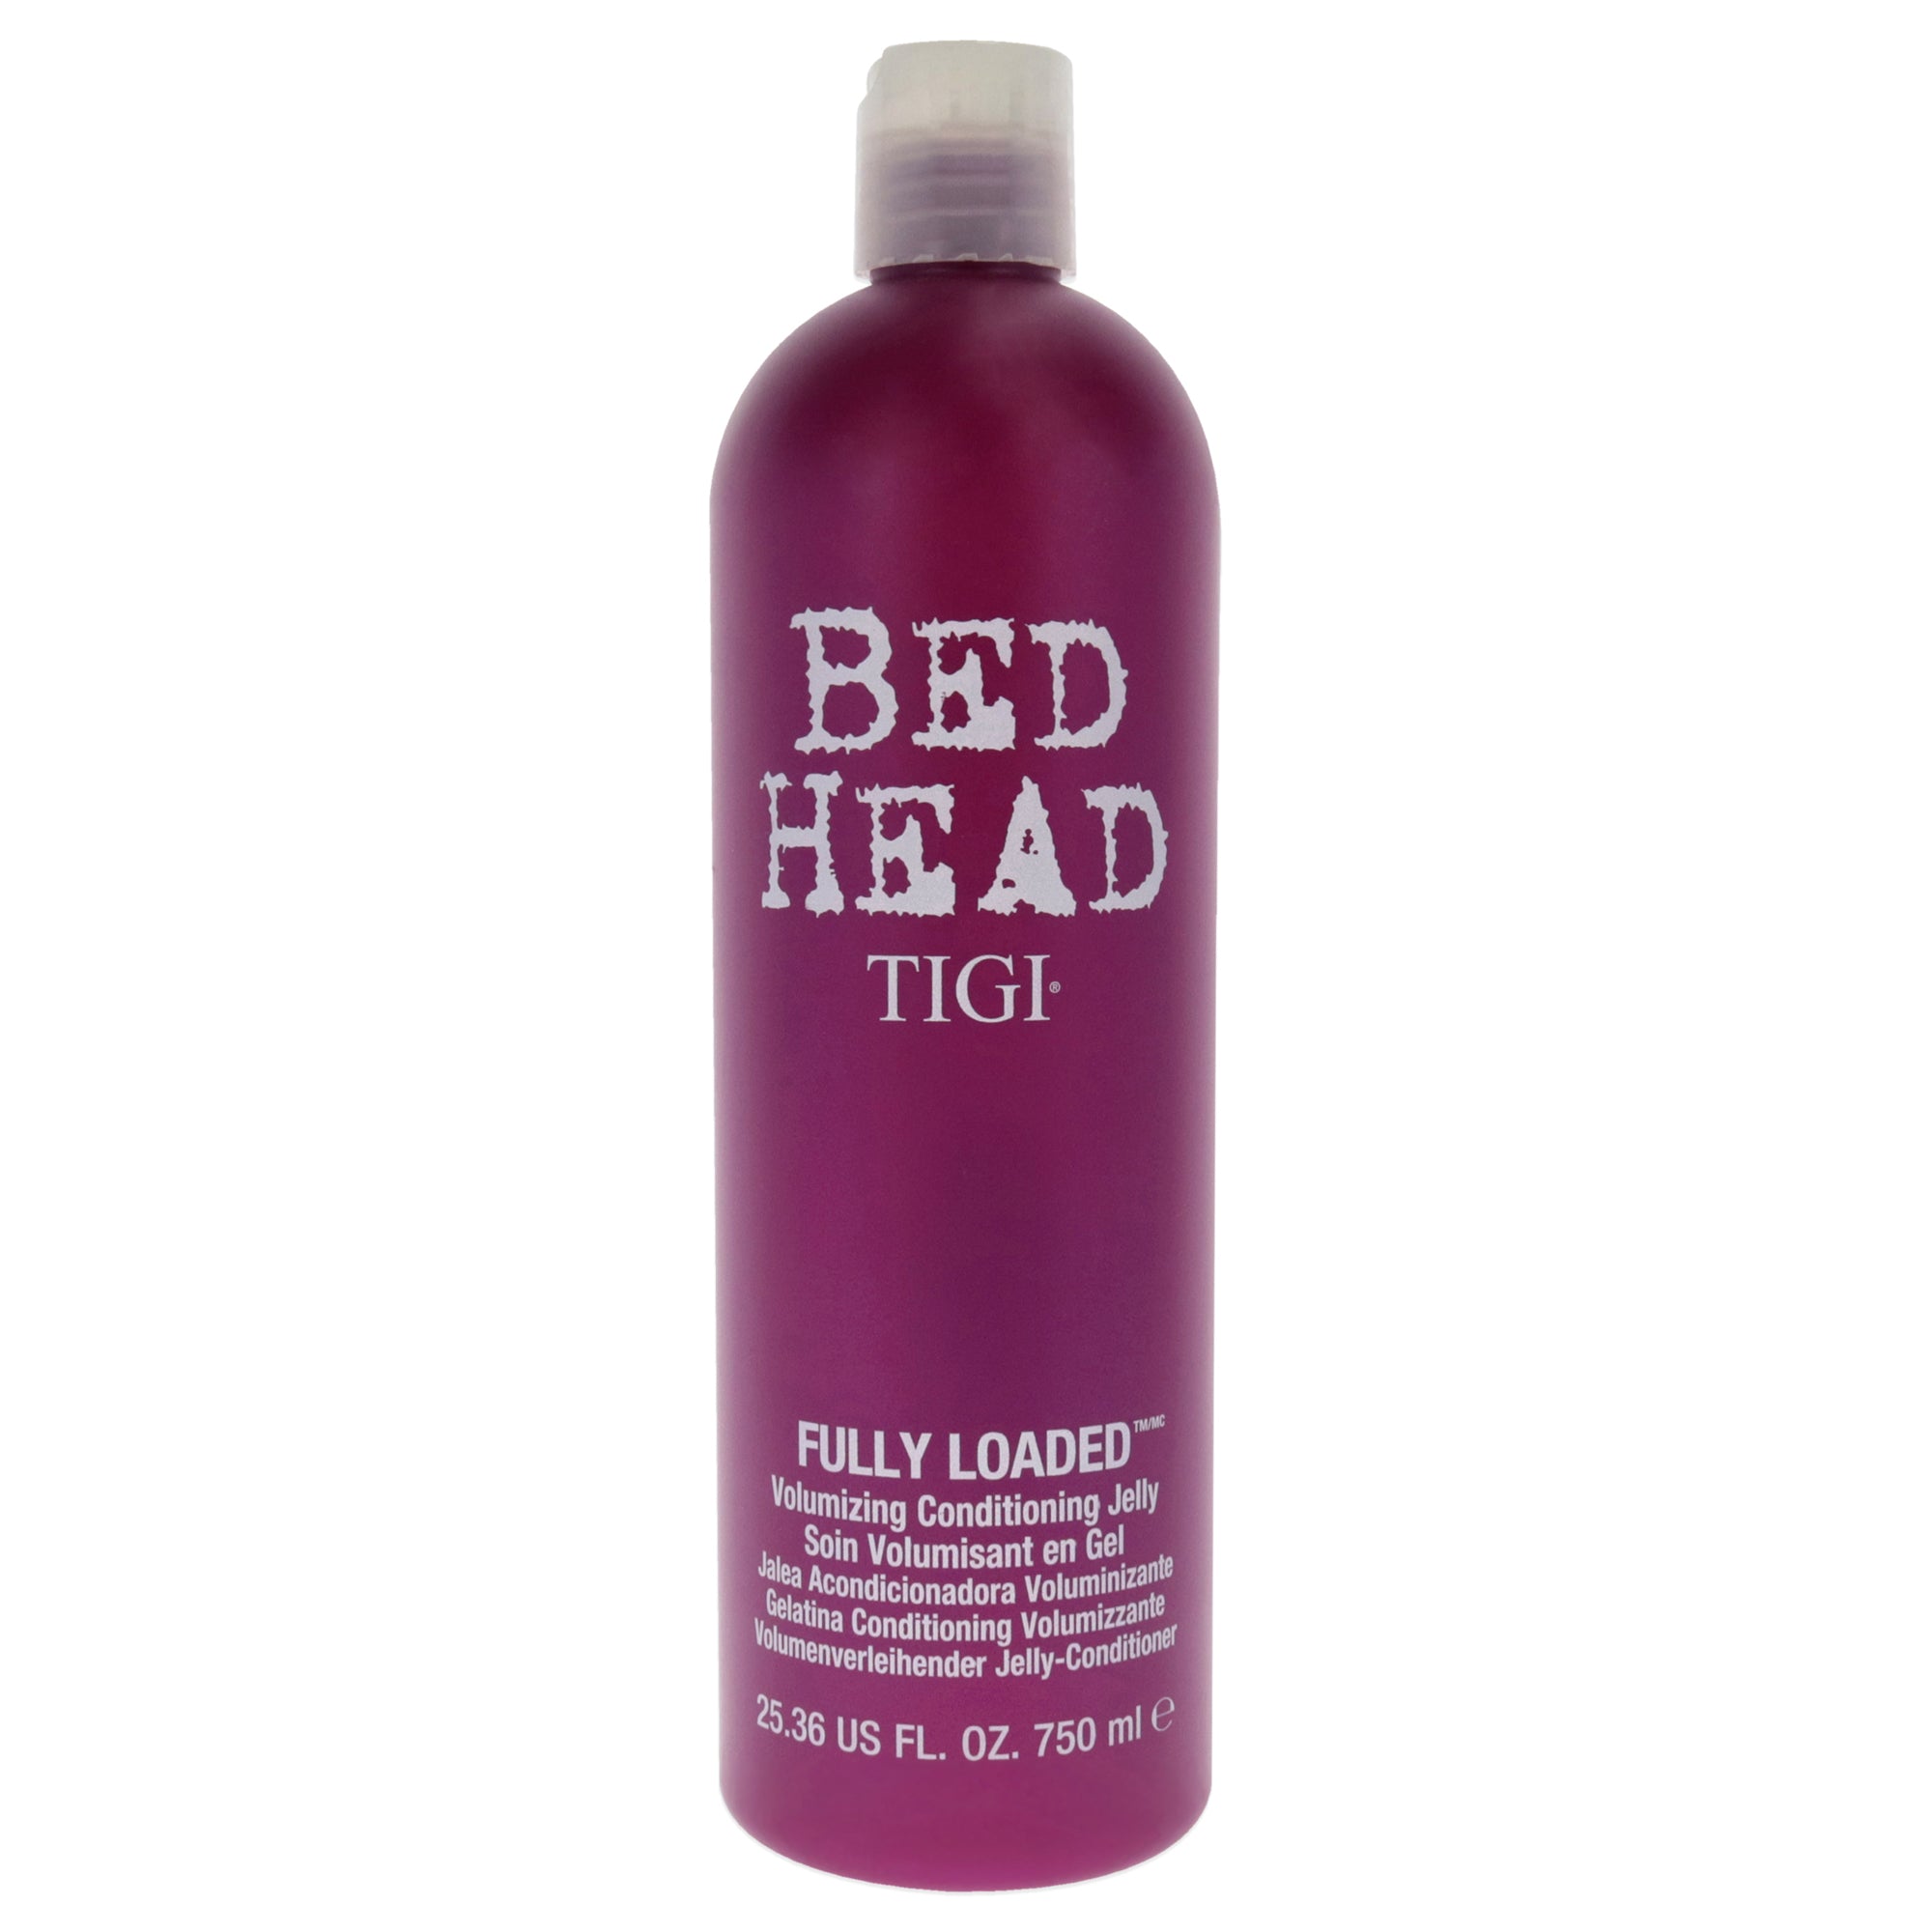 Tigi Bed Head Fully Loaded Volumizing Conditioning Jelly By  For Unisex - 25.36 oz Conditioner In White